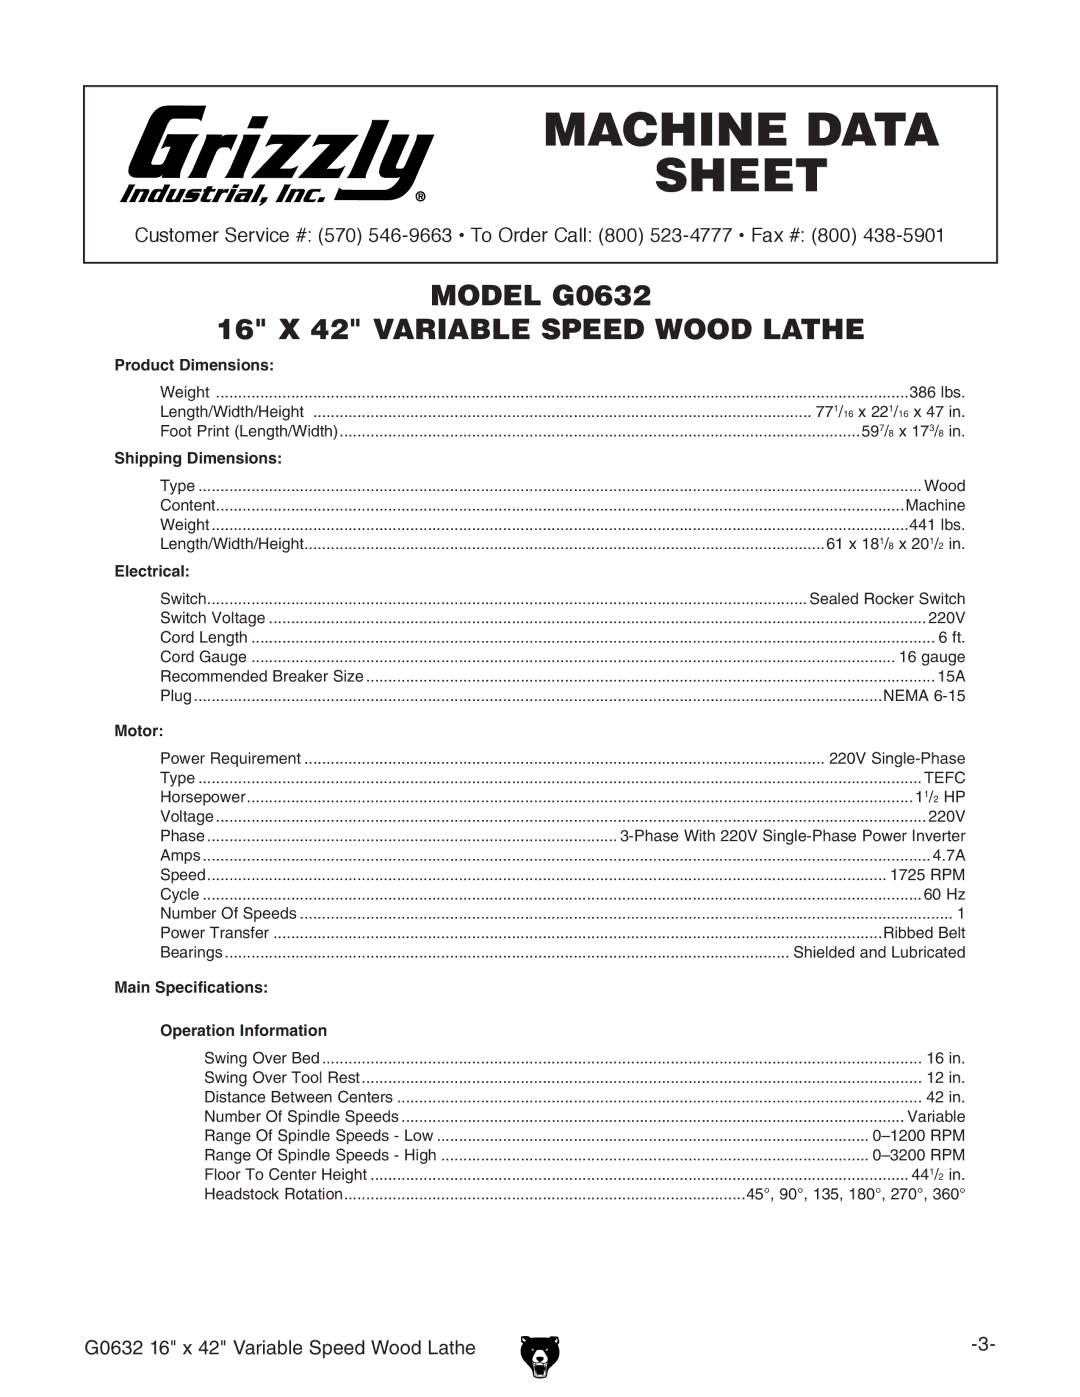 Grizzly G0632 owner manual Machine Data Sheet 